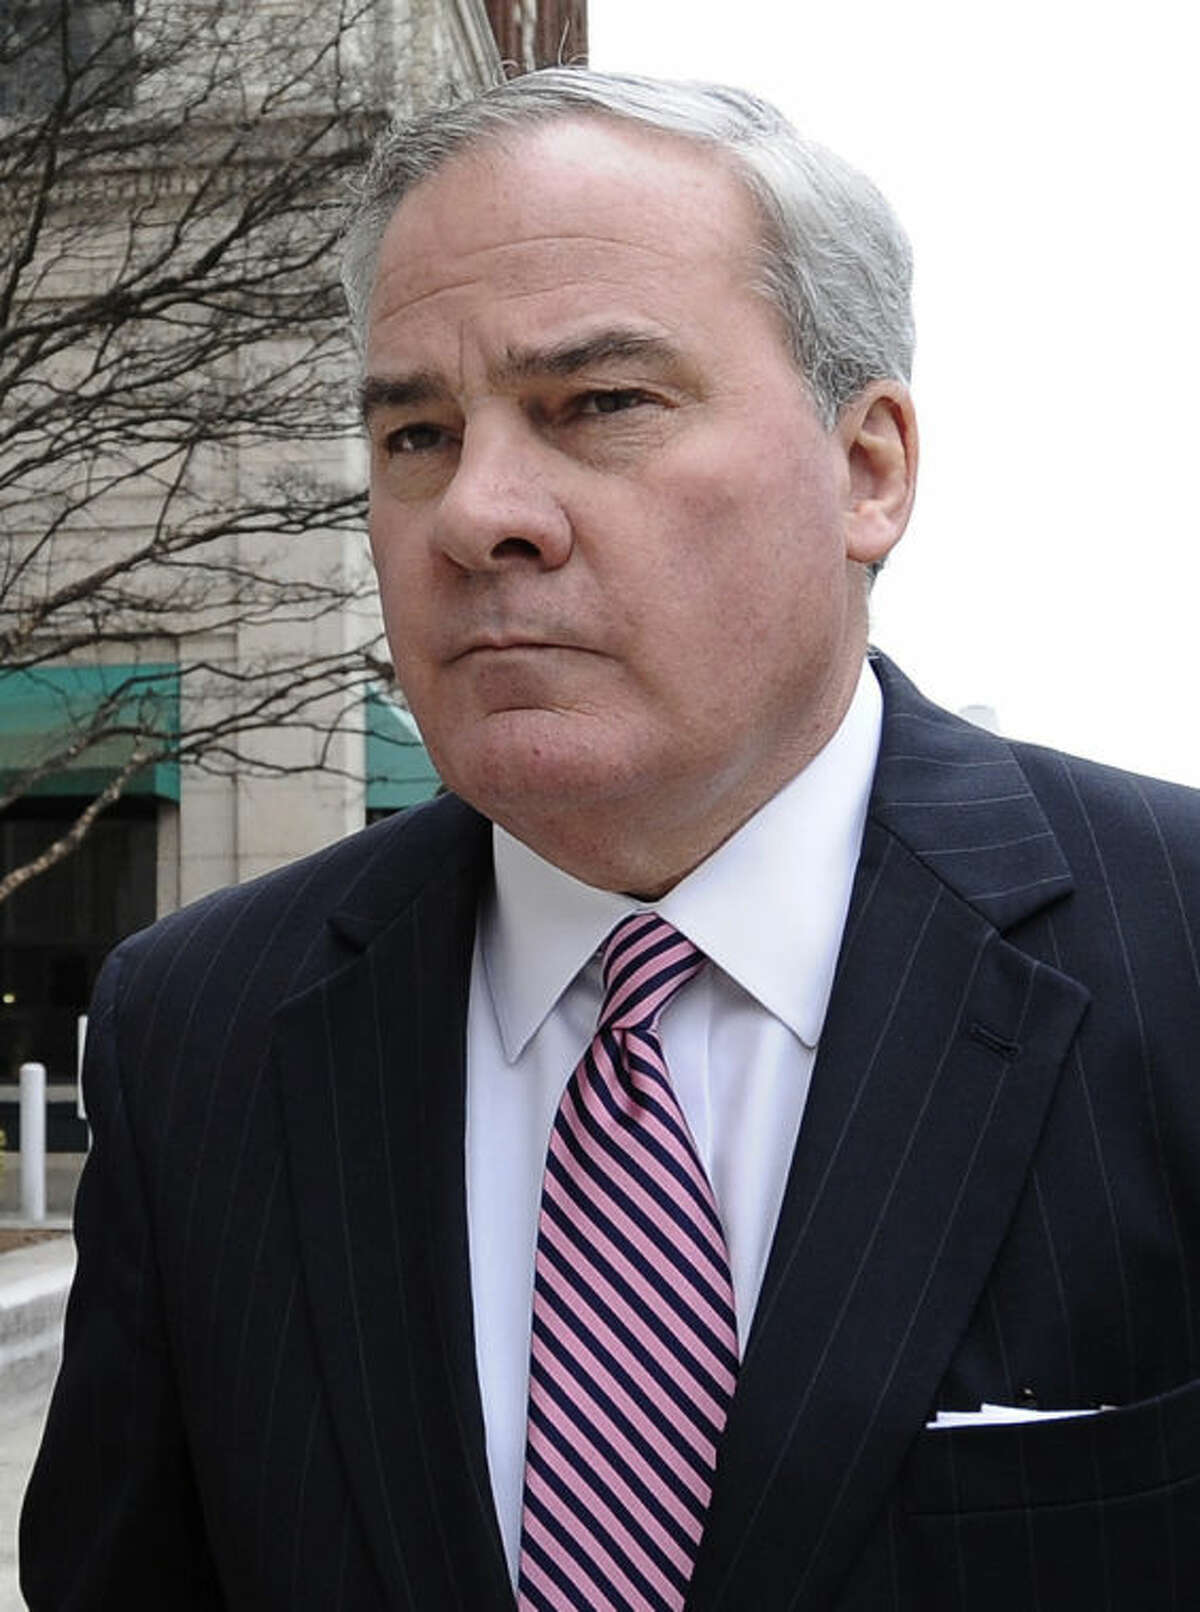 FILE - In this April 11, 2014 file photo, former Connecticut Gov. John G. Rowland arrives at federal court in New Haven, Conn., where a grand jury had returned a seven-count indictment the previous day alleging Rowland schemed to conceal involvement with congressional campaigns. Rowland's attorneys filed a motion filed Tuesday, May 20, 2014, seeking to dismiss the charges that he broke federal election laws in his roles with the two congressional campaigns.(AP Photo/Jessica Hill, File)